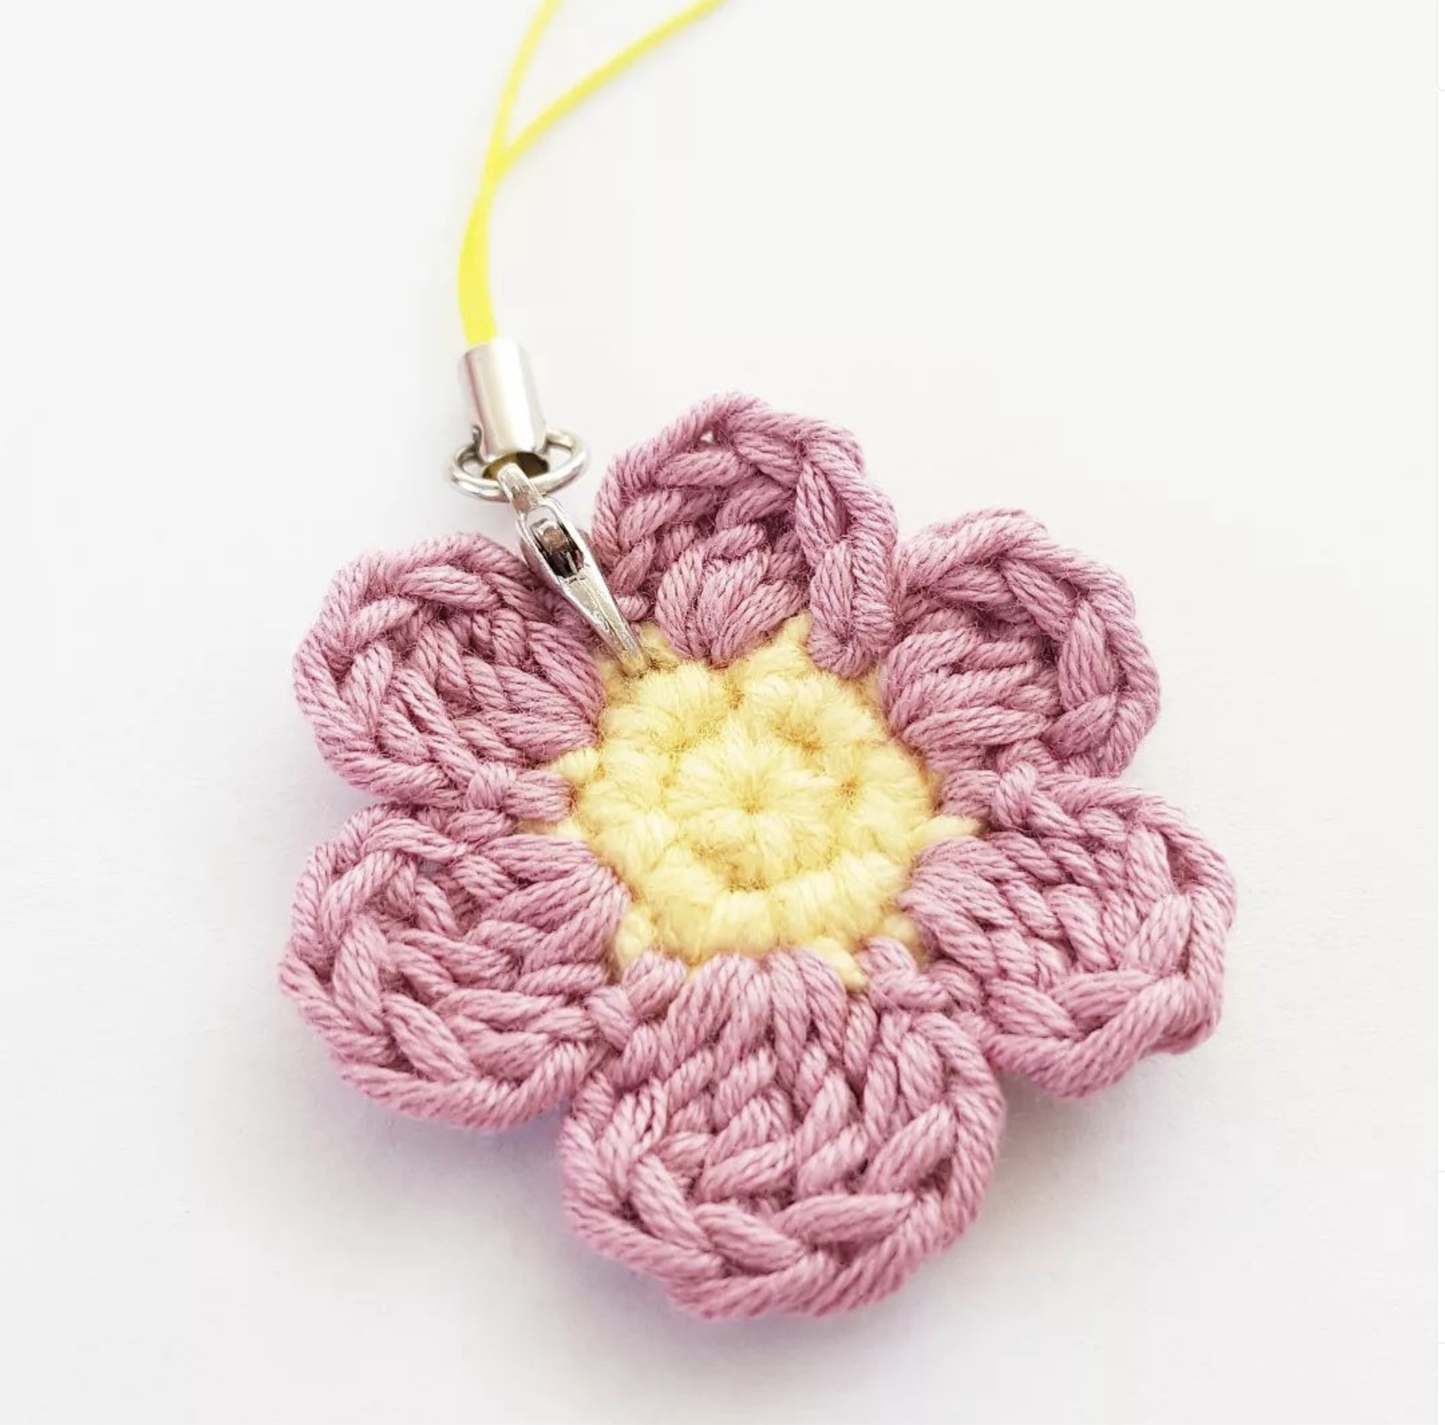 "Elegant Handcrafted Blooms: Crochet Flower Keychains by CocoFlower"